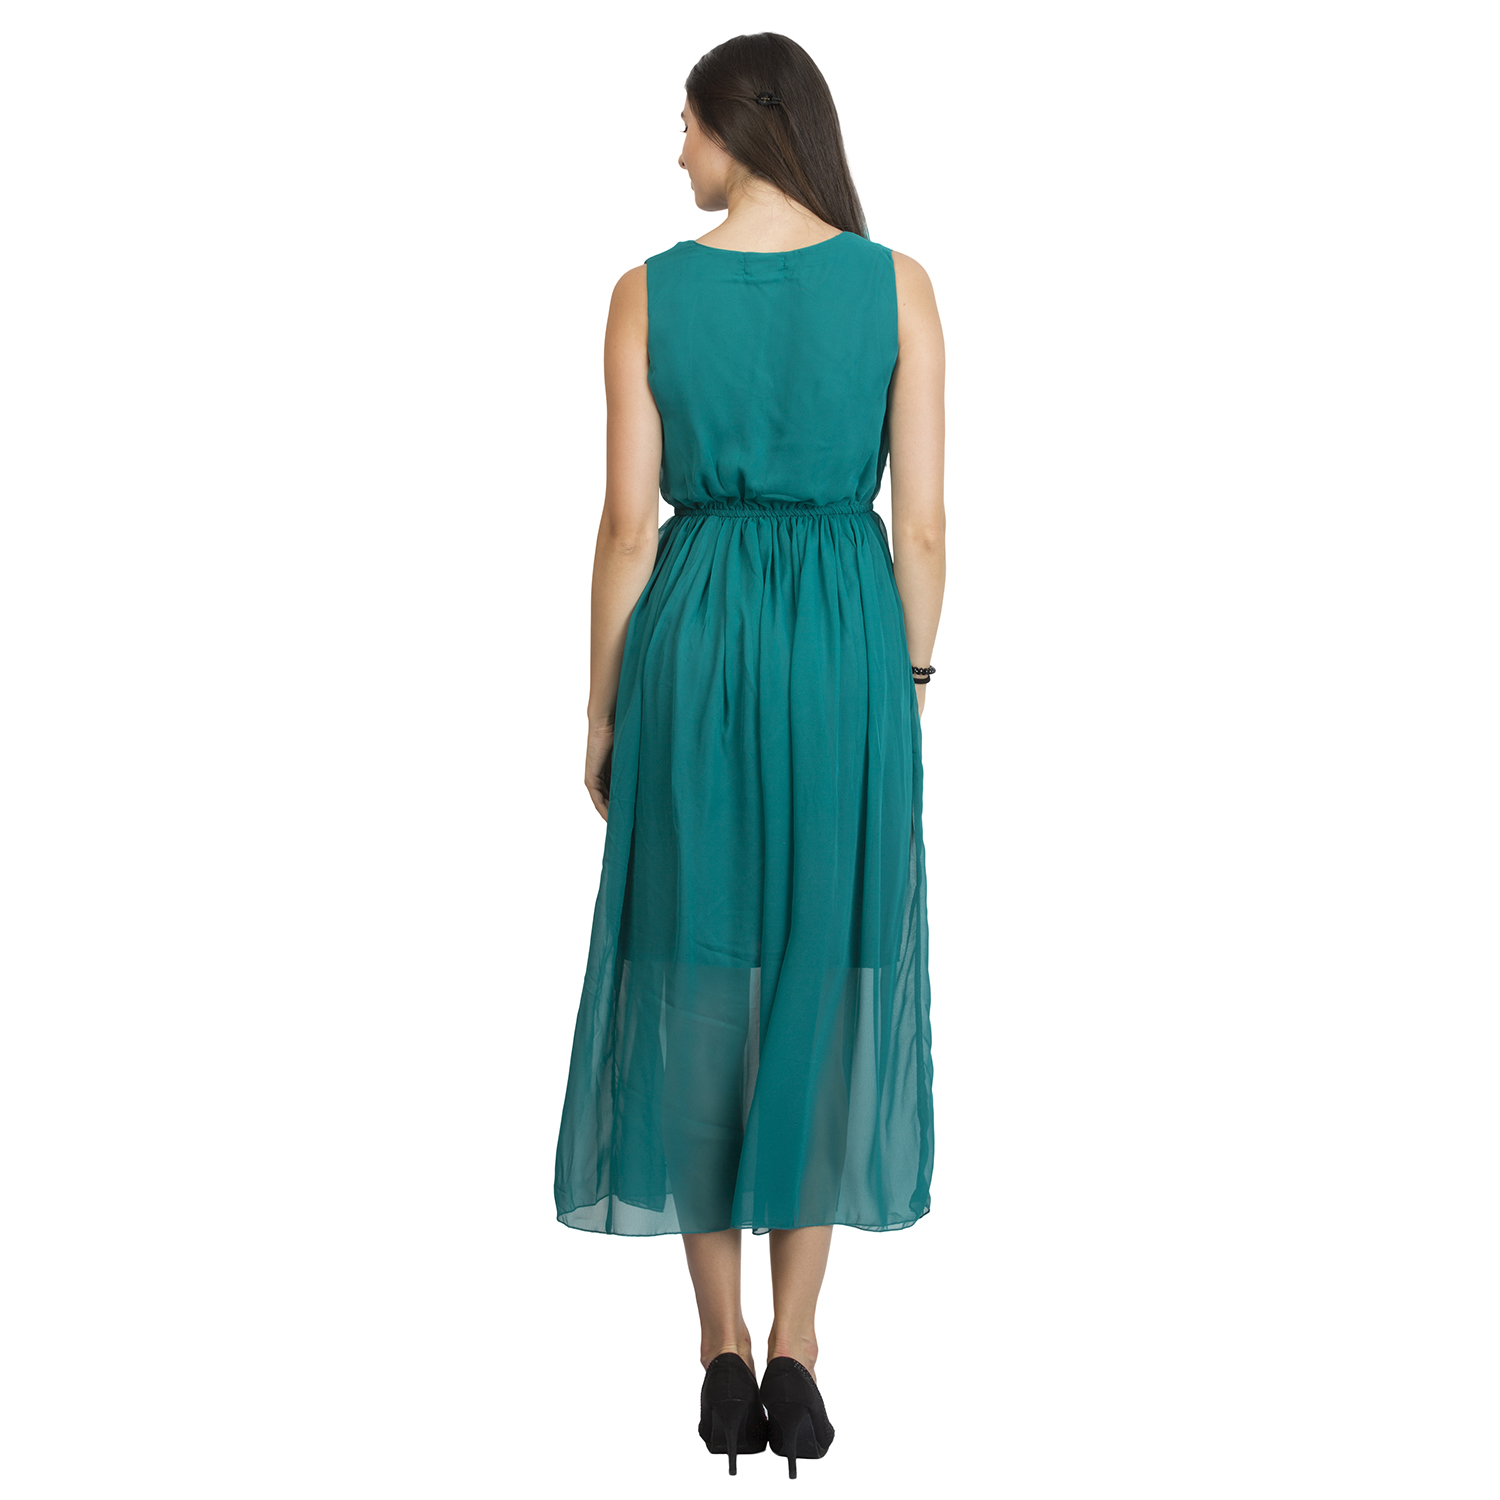 Buy Green Solid Women's Casual Dress Online @ ₹360 from ShopClues